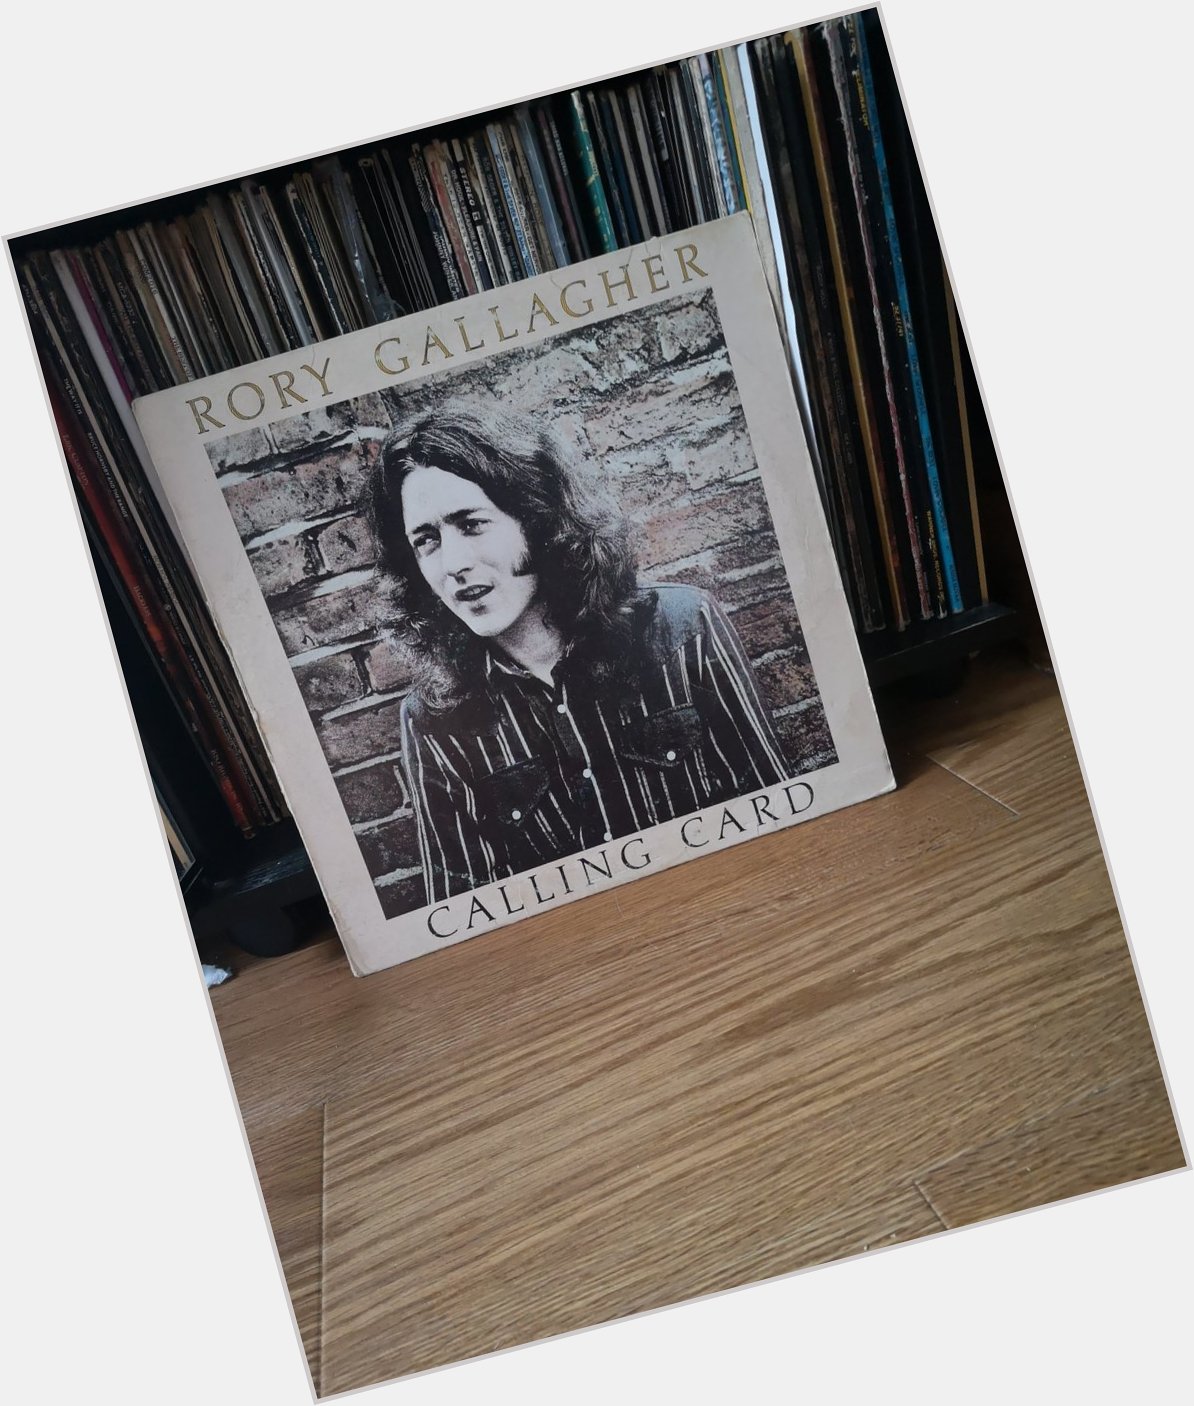 Music to make dinner to..
Happy birthday Rory Gallagher. Gone too soon. 